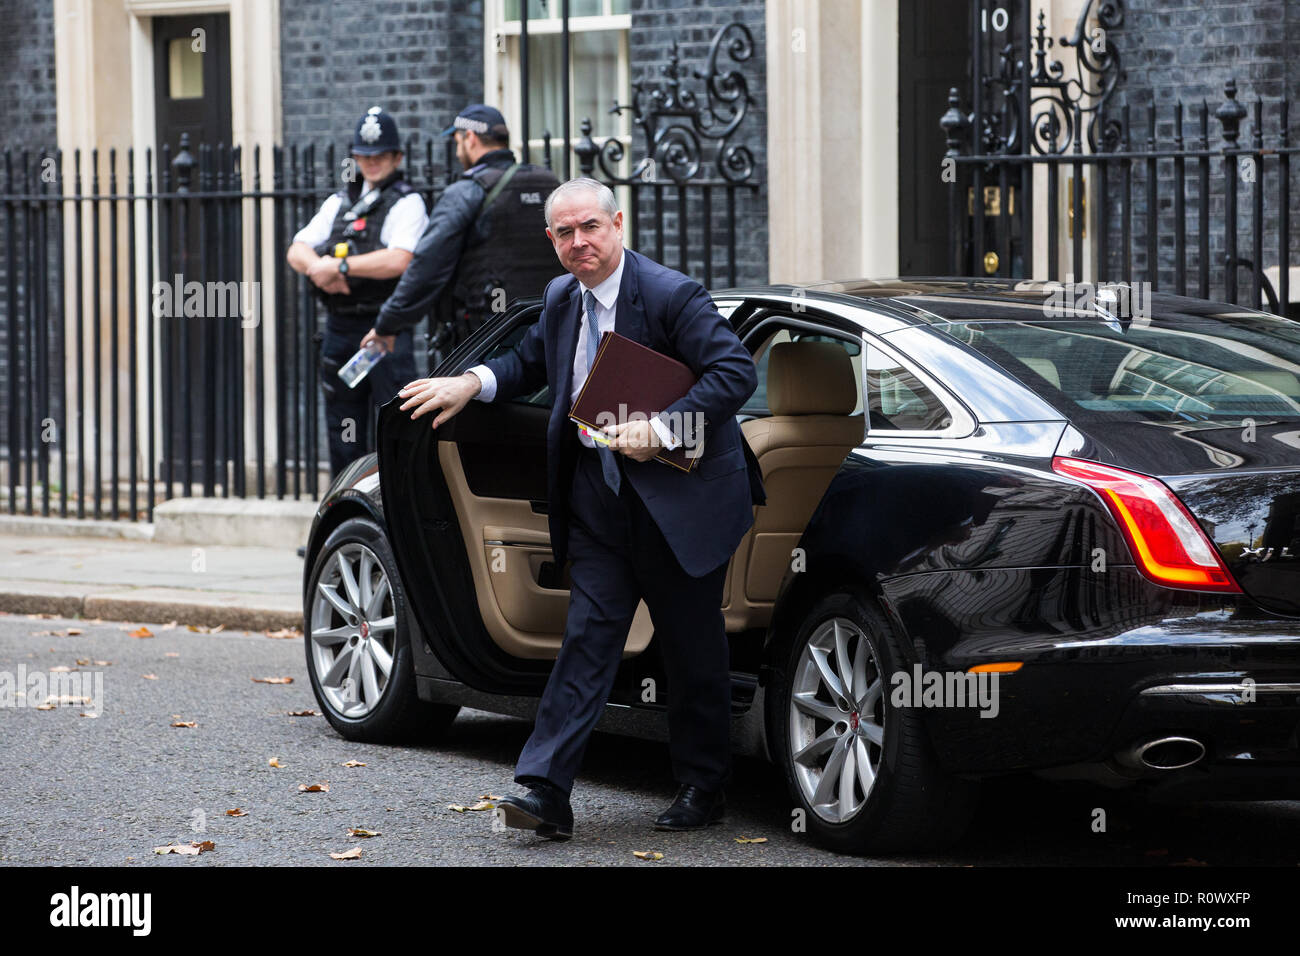 London, UK. 6th November, 2018. Geoffrey Cox QC MP, Attorney General, arrives at 10 Downing Street for a meeting. Stock Photo